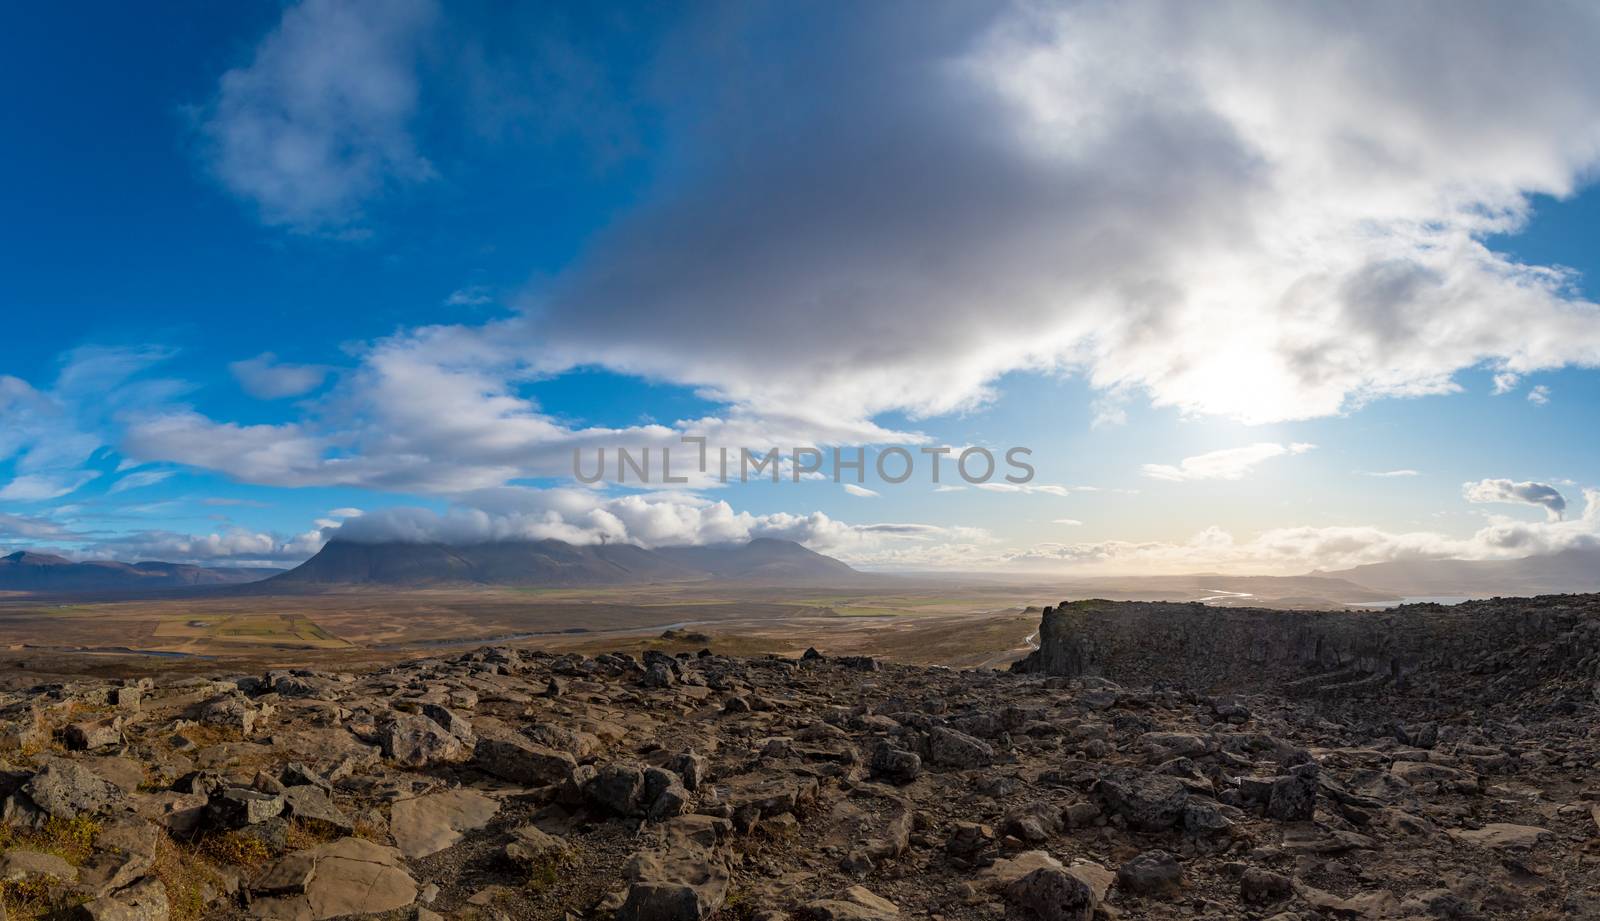 Borgarvirki mountain castle in Iceland panorama from top over stone walls and valley by MXW_Stock